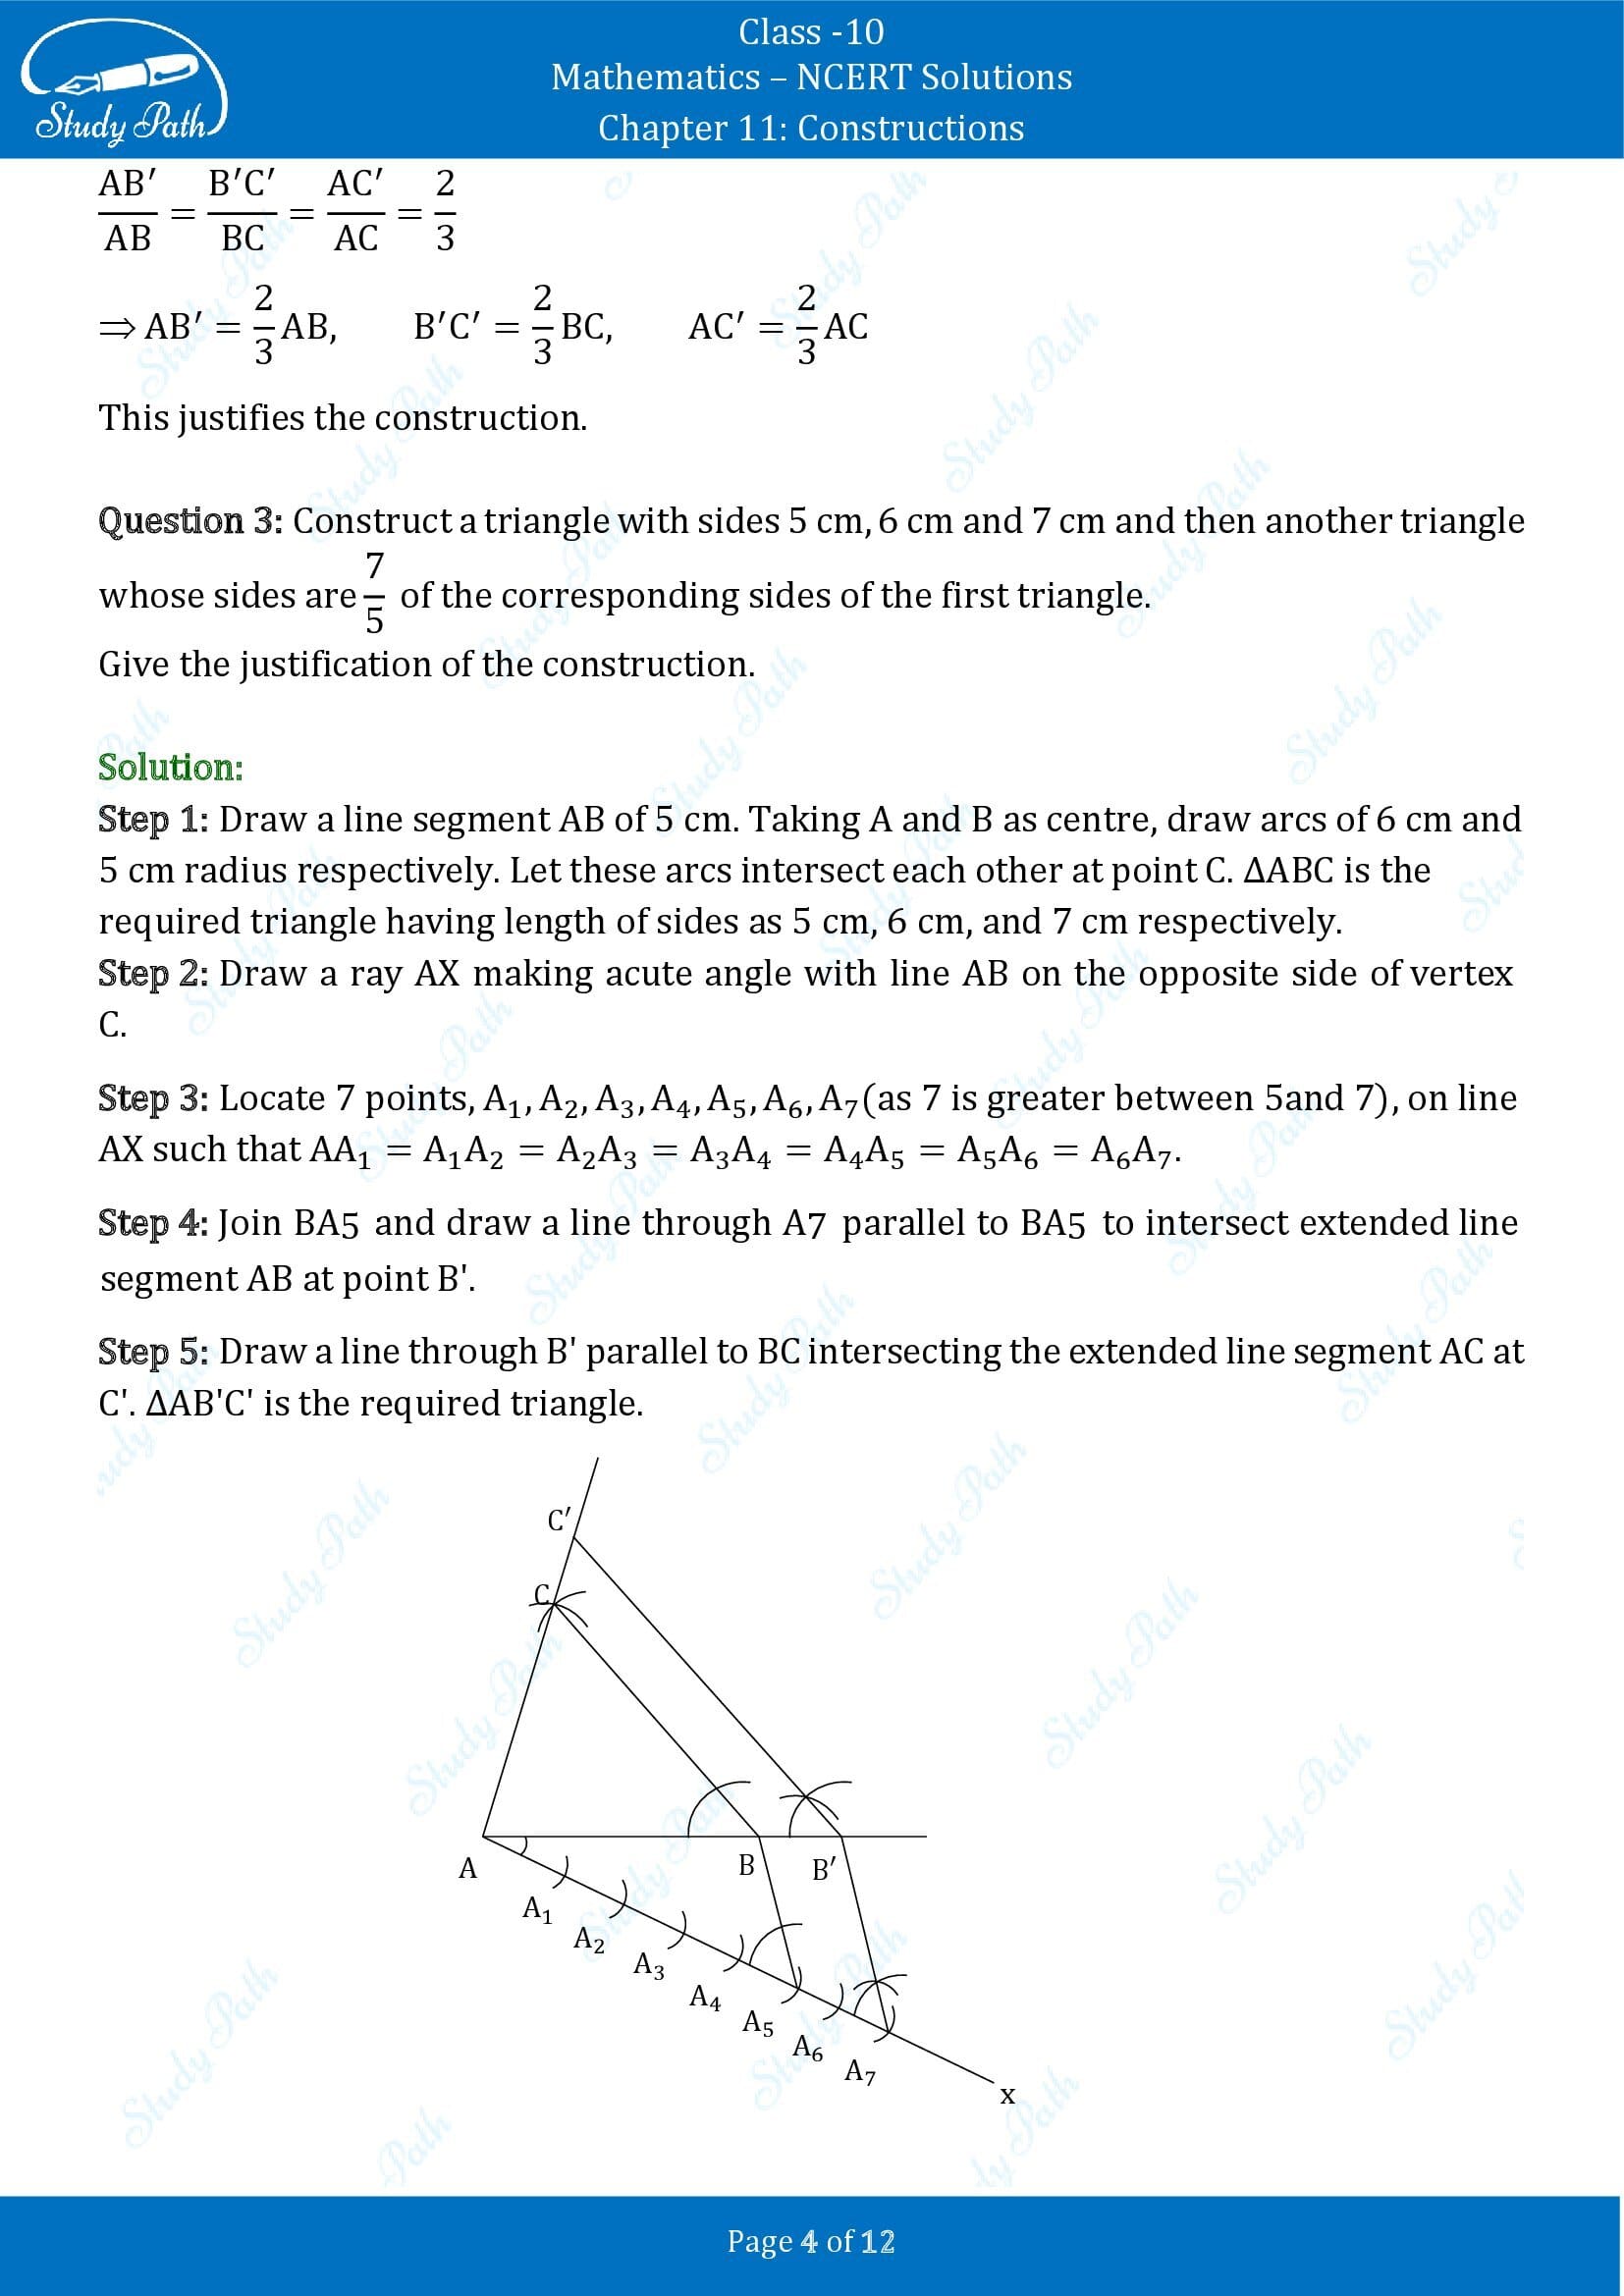 NCERT Solutions for Class 10 Maths Chapter 11 Constructions Exercise 11.1 00004